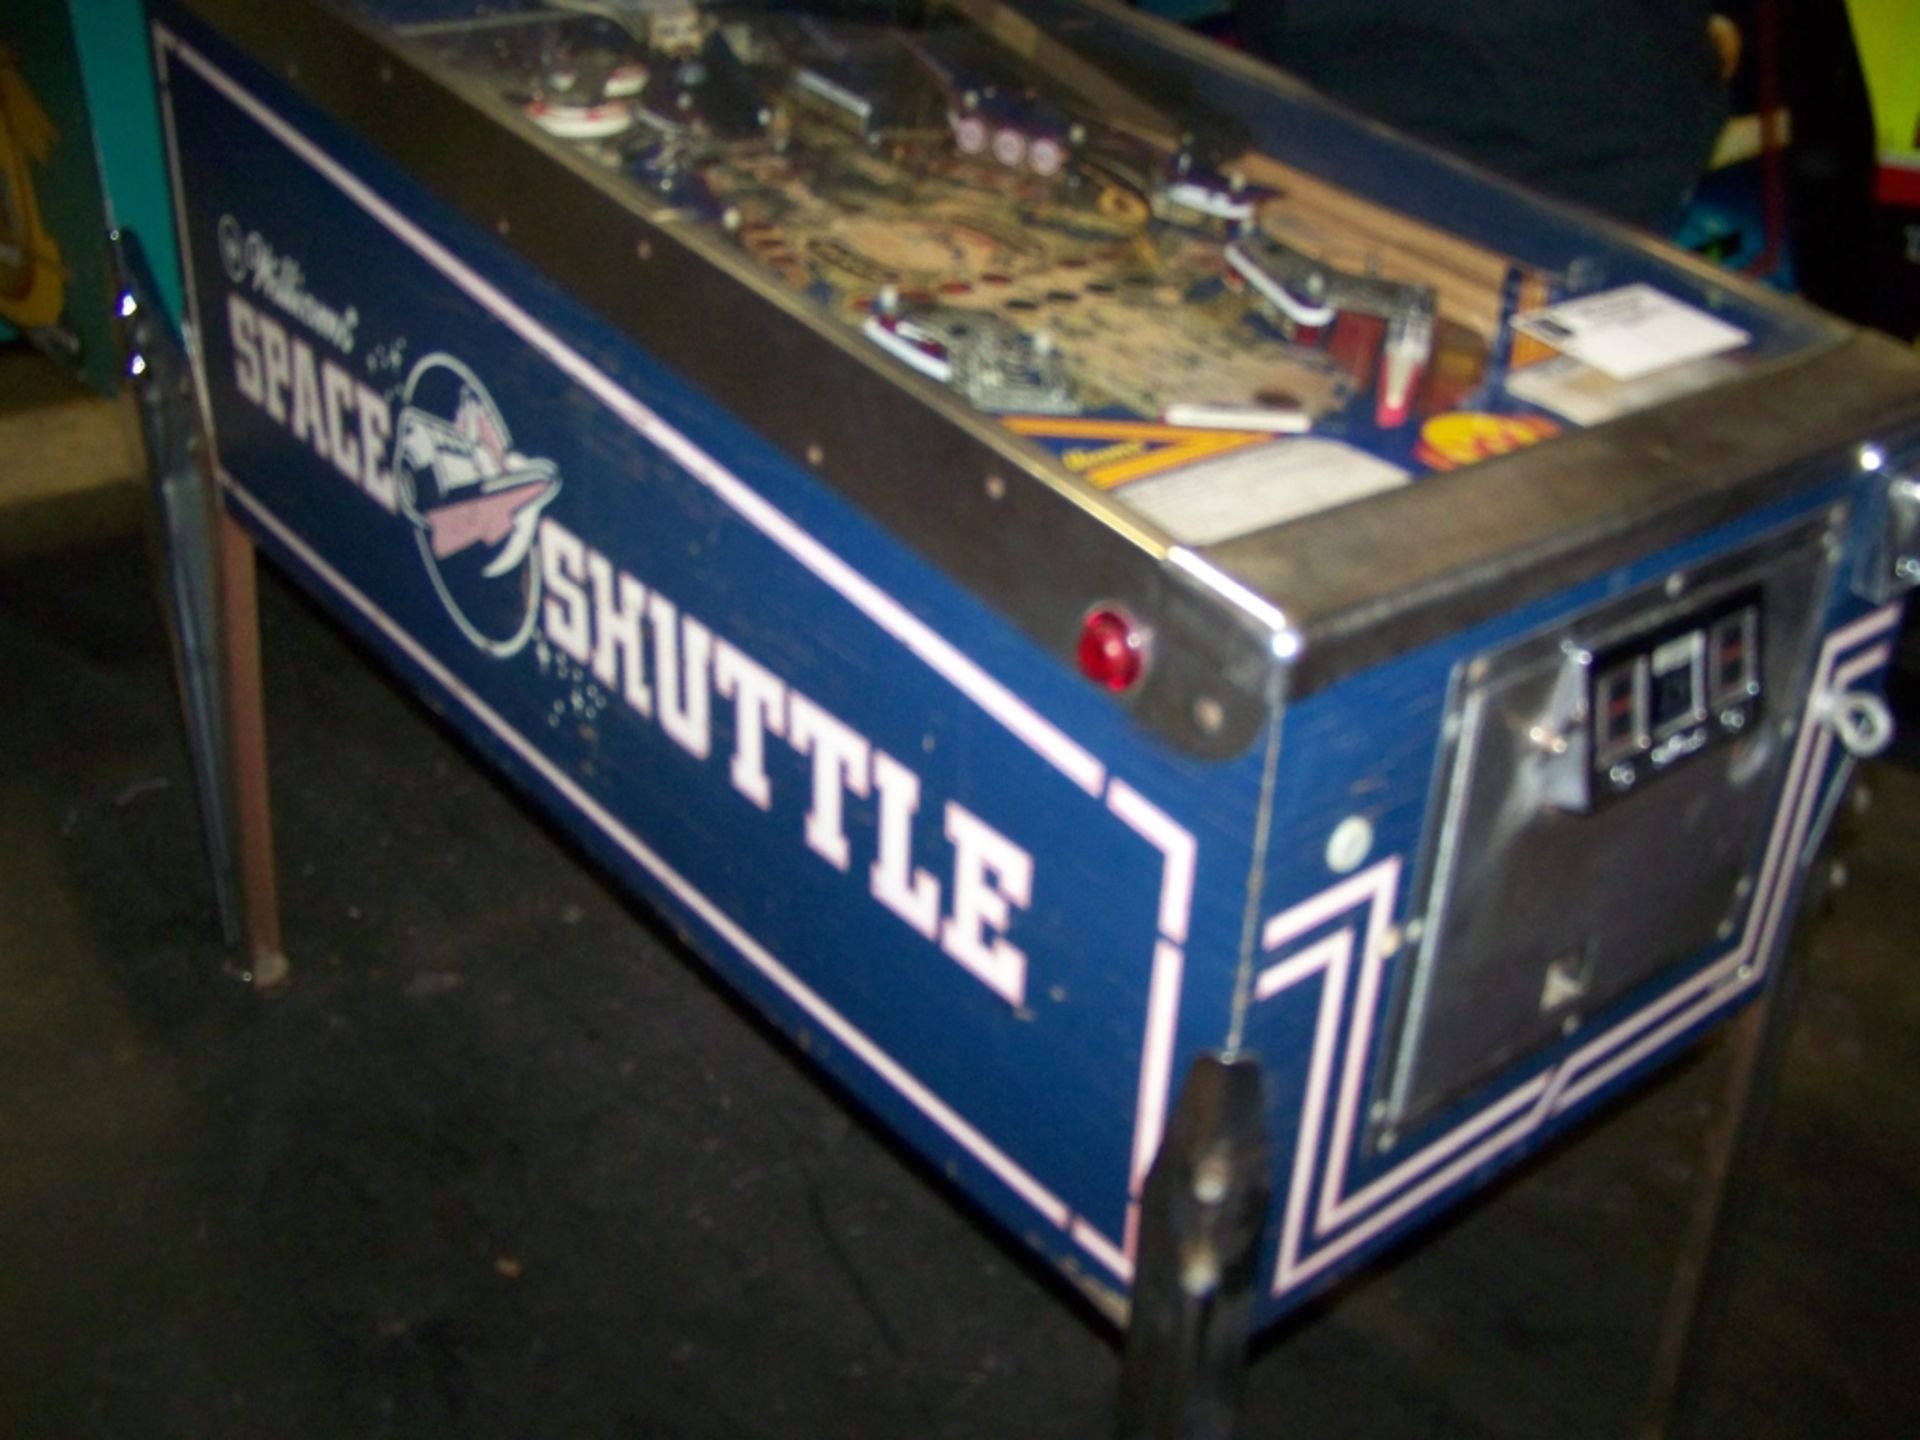 SPACE SHUTTLE PINBALL MACHINE PROJECT WILLIAMS Item is in used condition. Evidence of wear and - Image 5 of 6